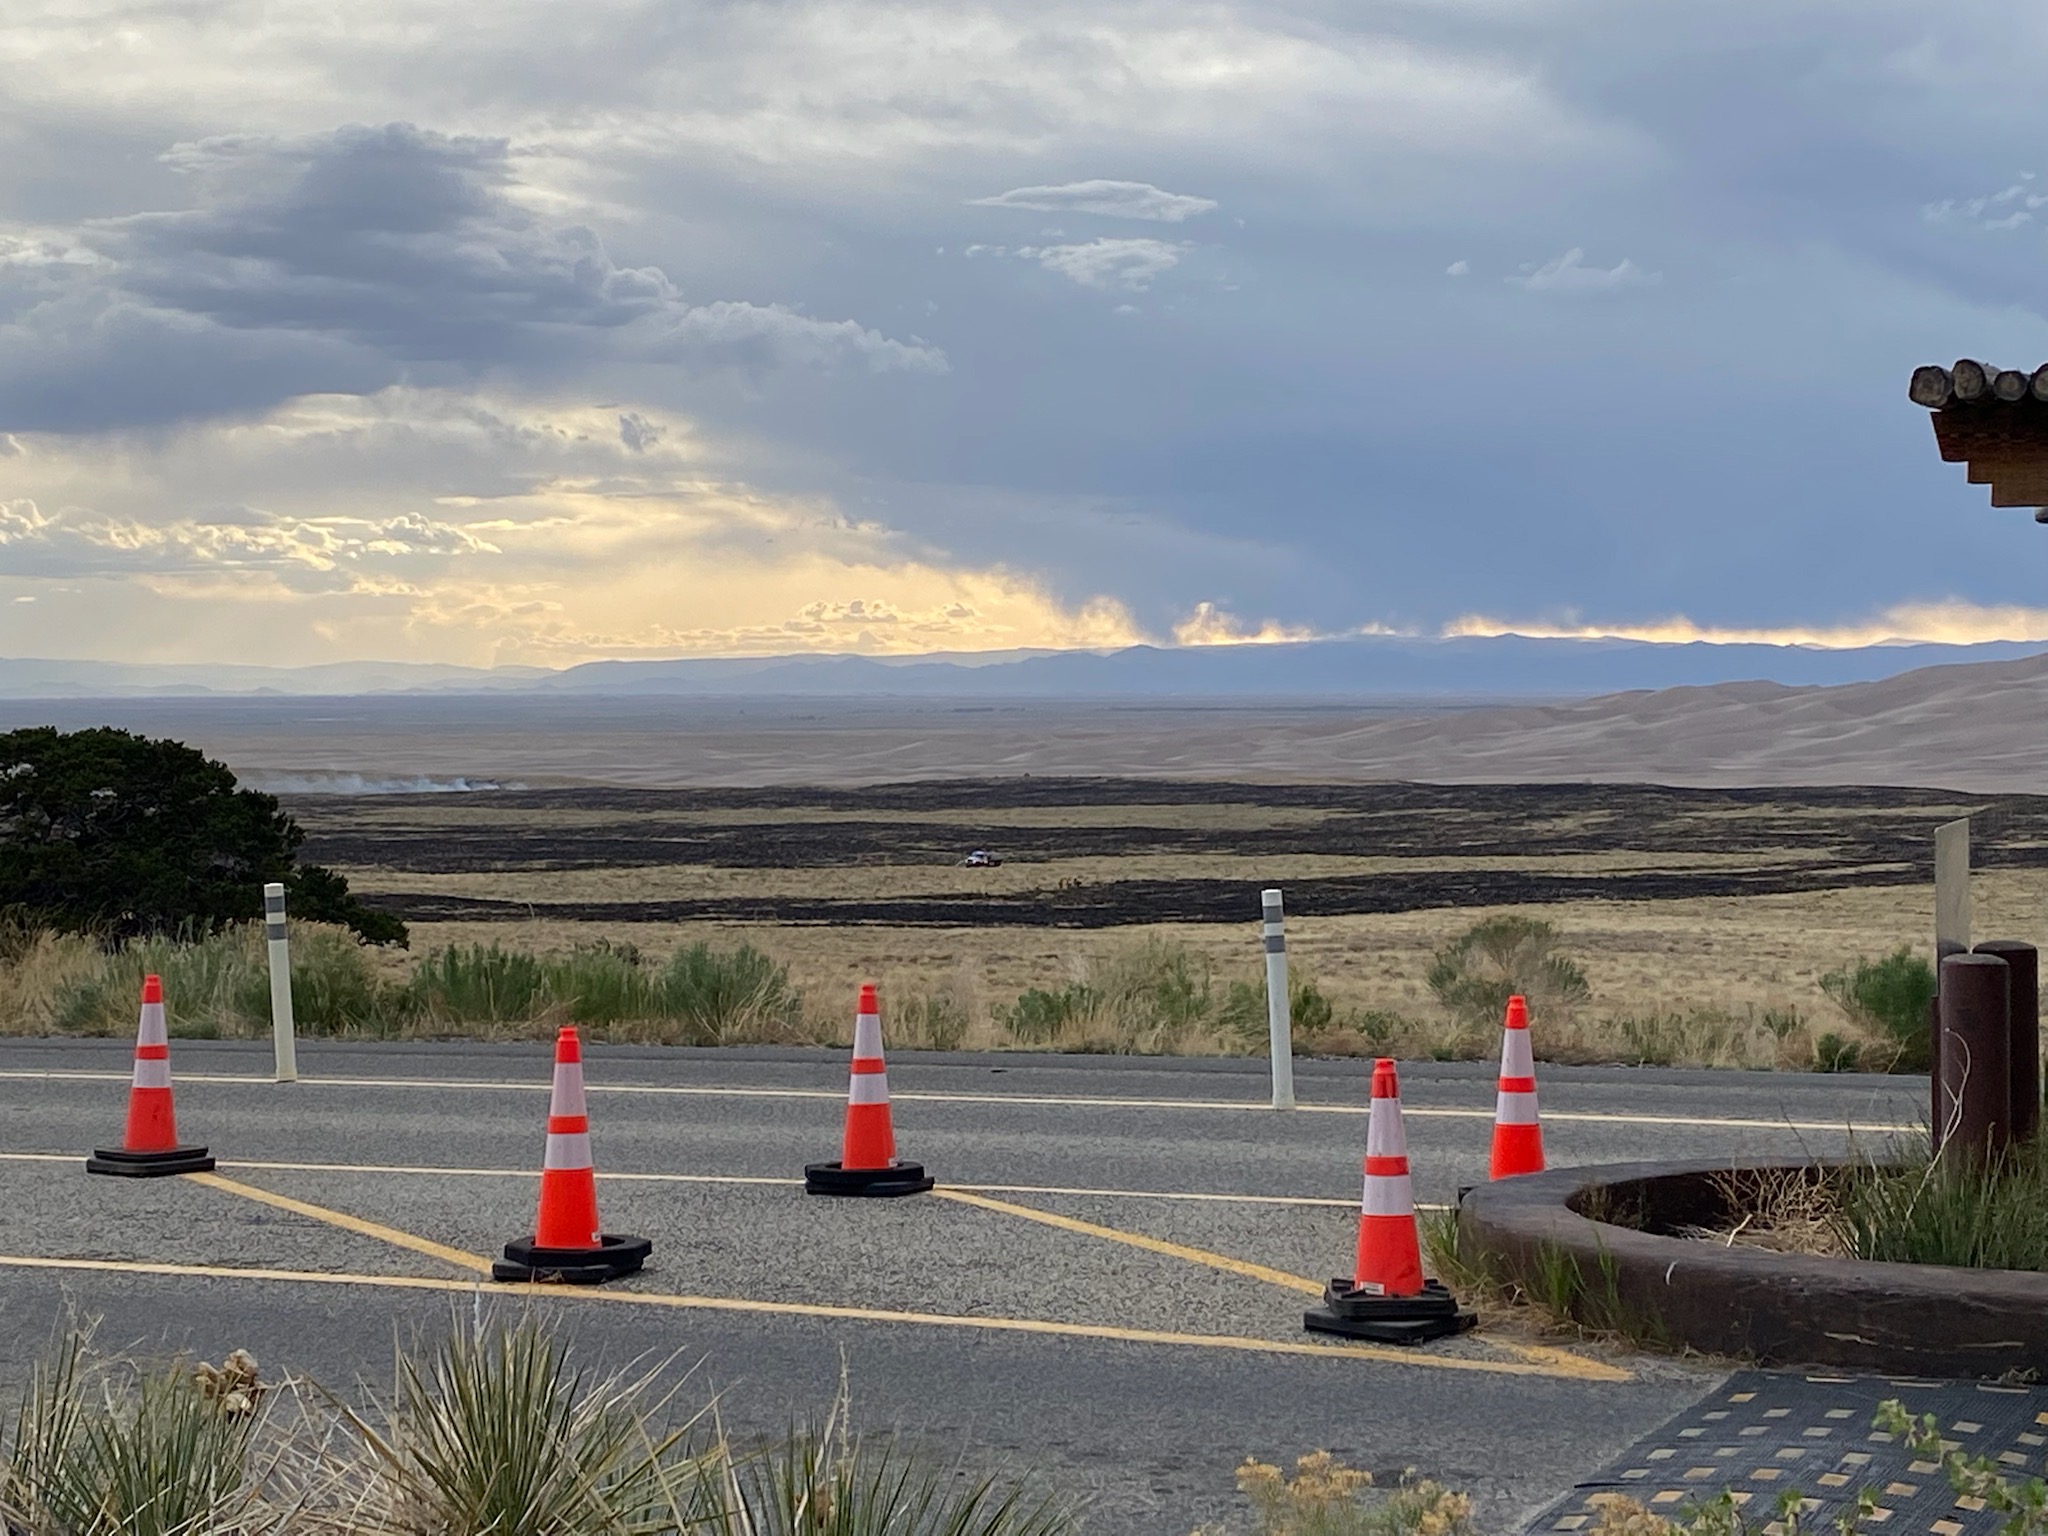 A view from the park entrance station to burned grasslands and dunes